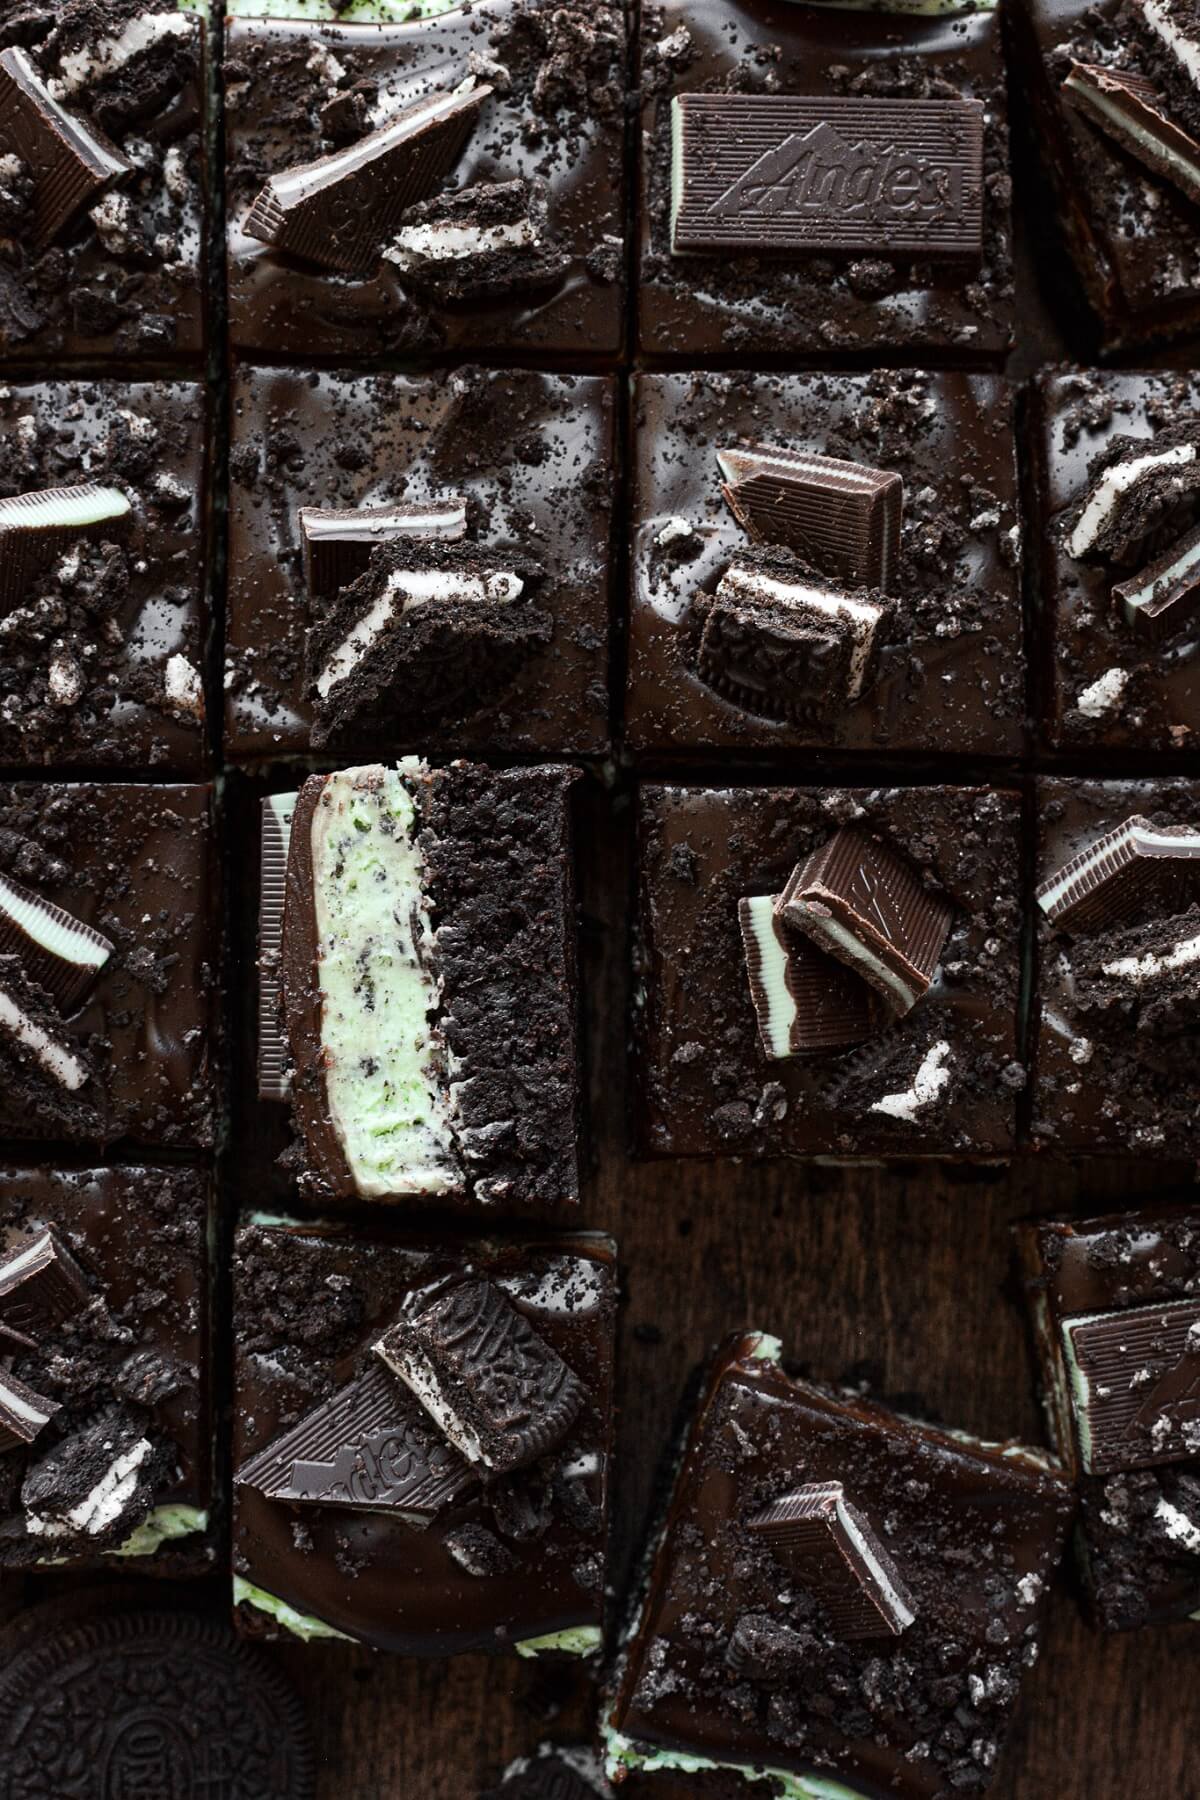 Mint Oreo brownies with mint cookies and cream buttercream, ganache, Andes mints and crushed Oreos.